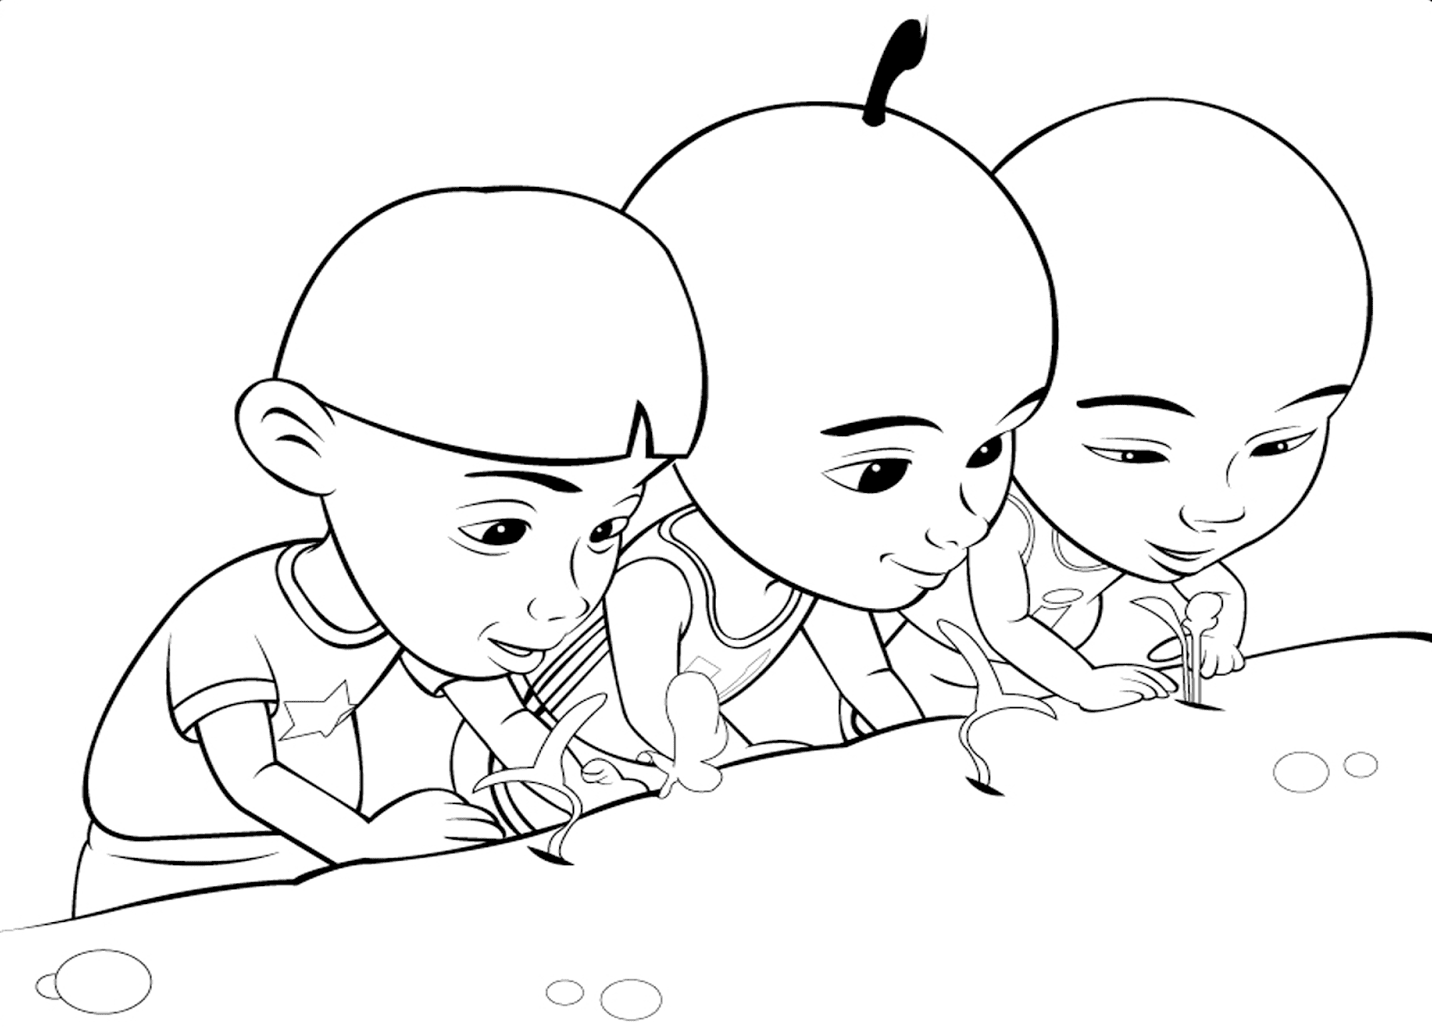 Upin And Ipin Coloring Pages   Free Printable Coloring Pages for Kids